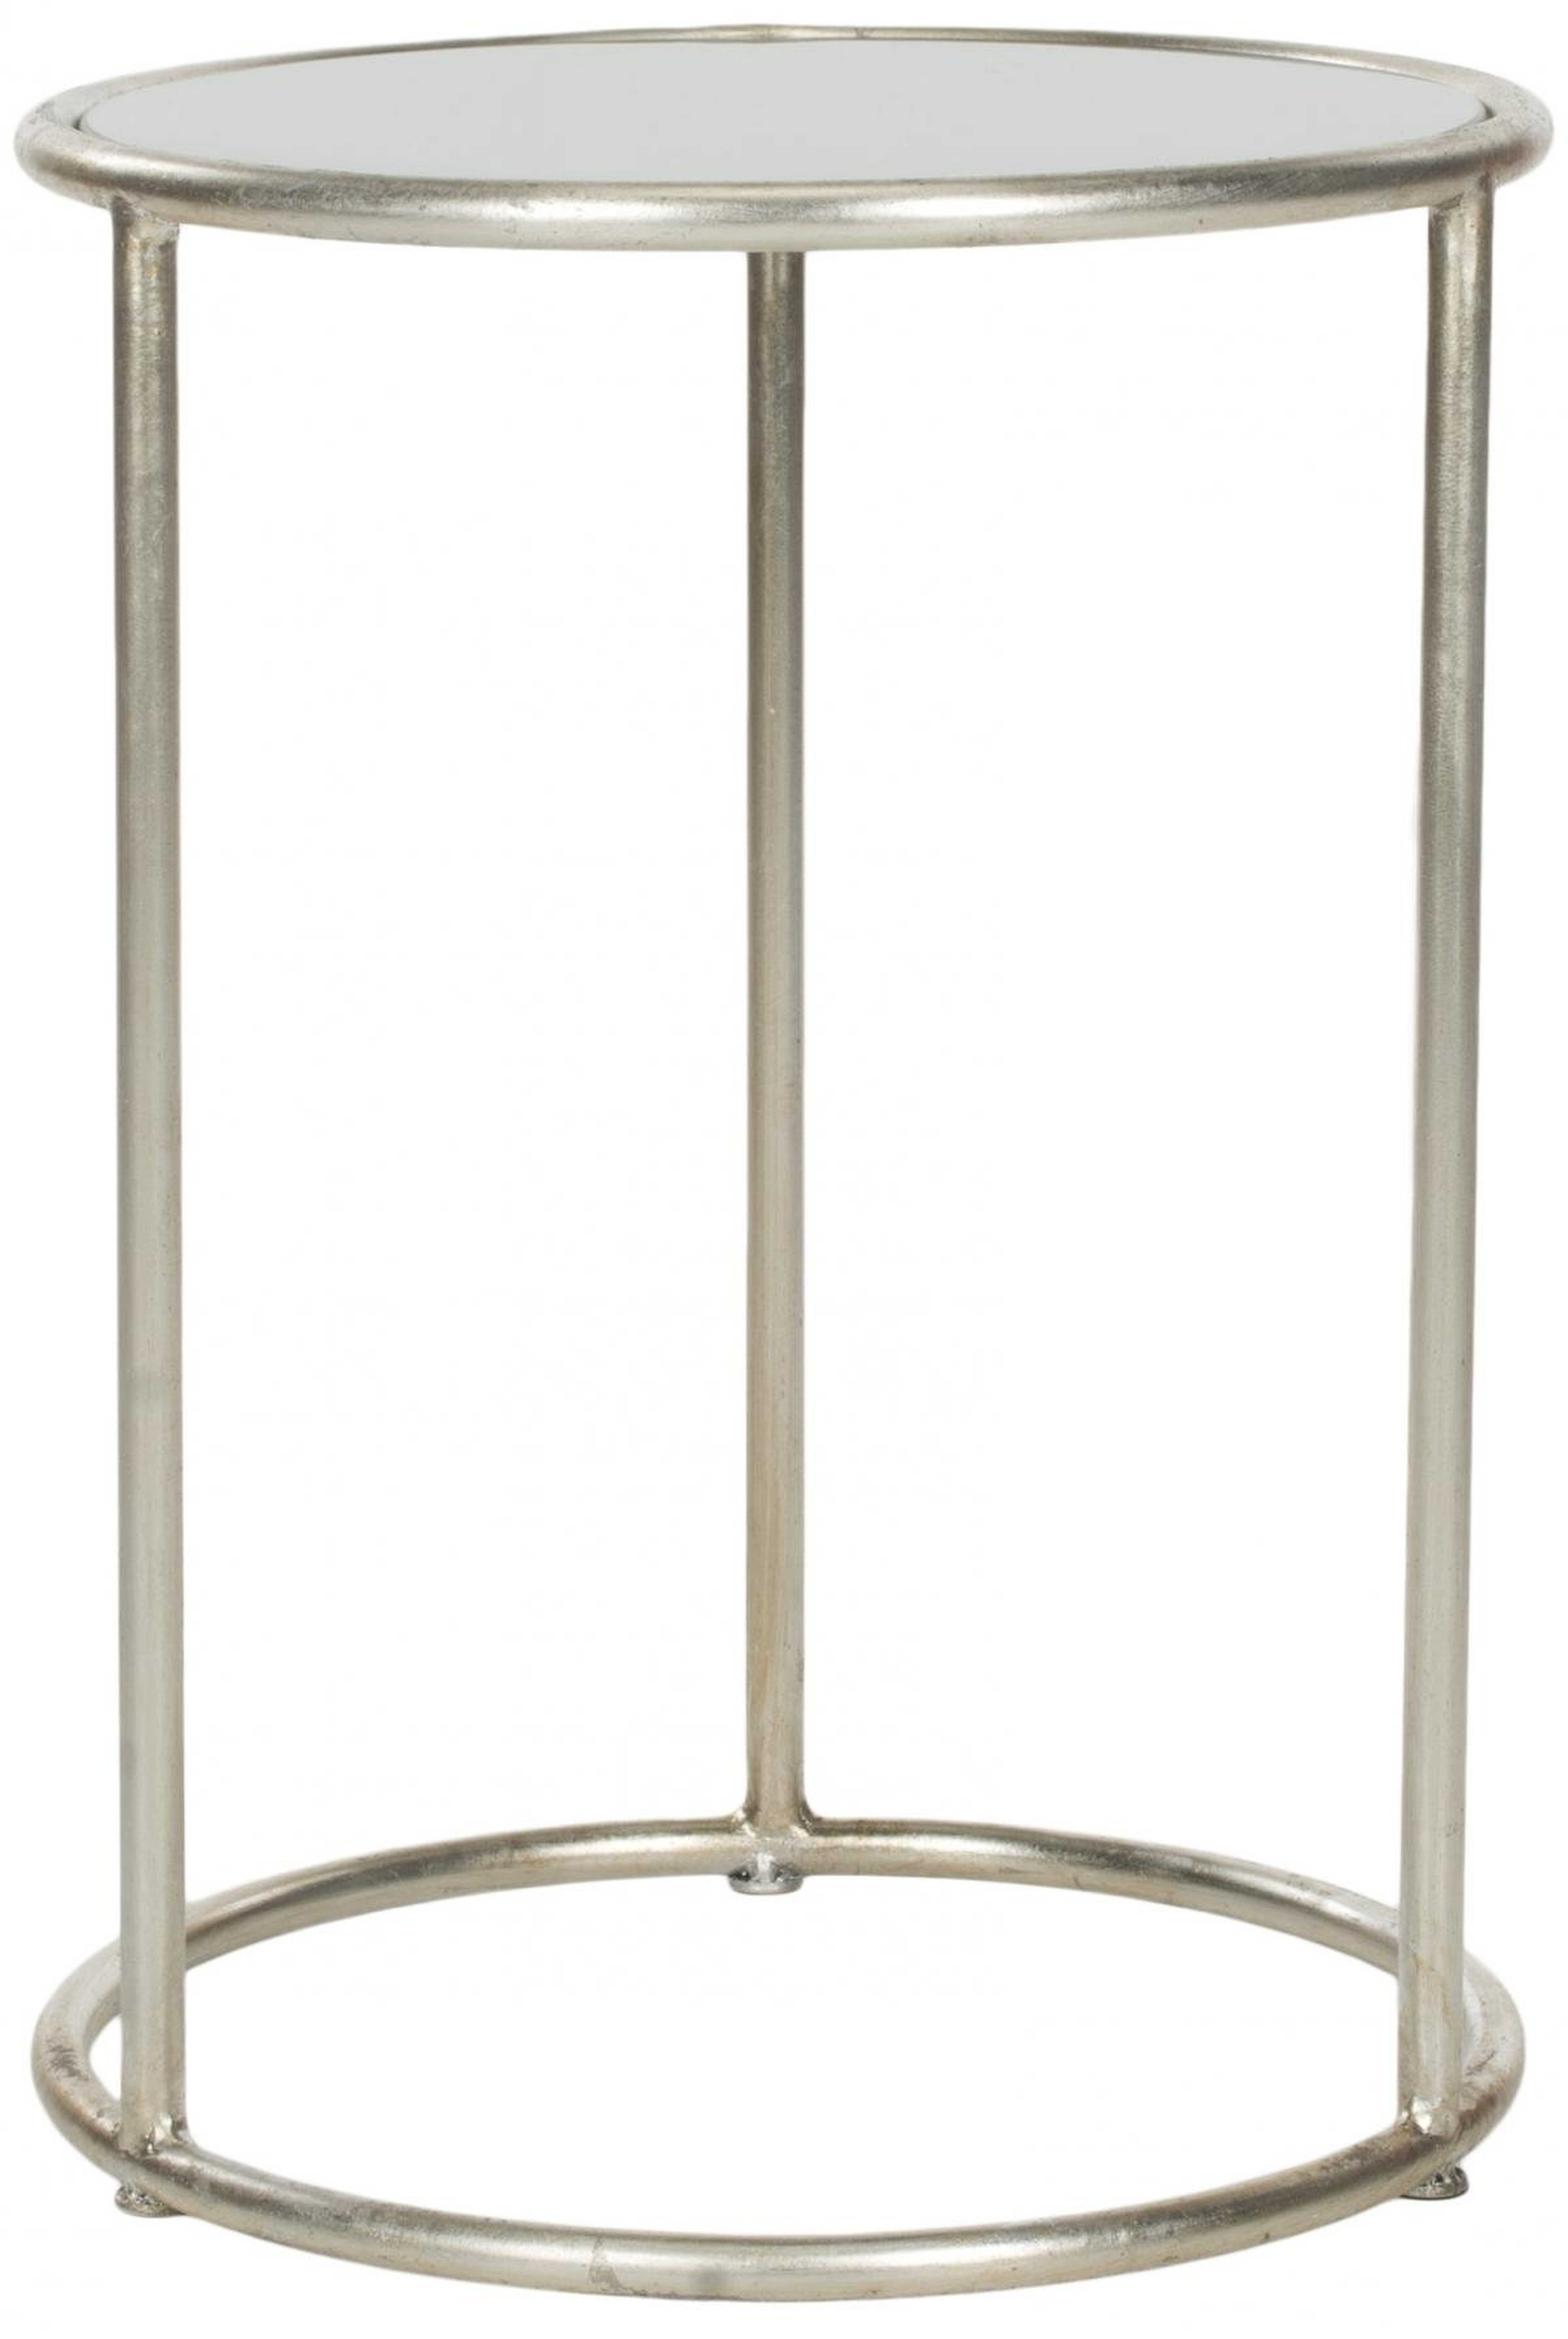 Shay Glass Top Accent Table - Silver/Grey - Safavieh - Arlo Home